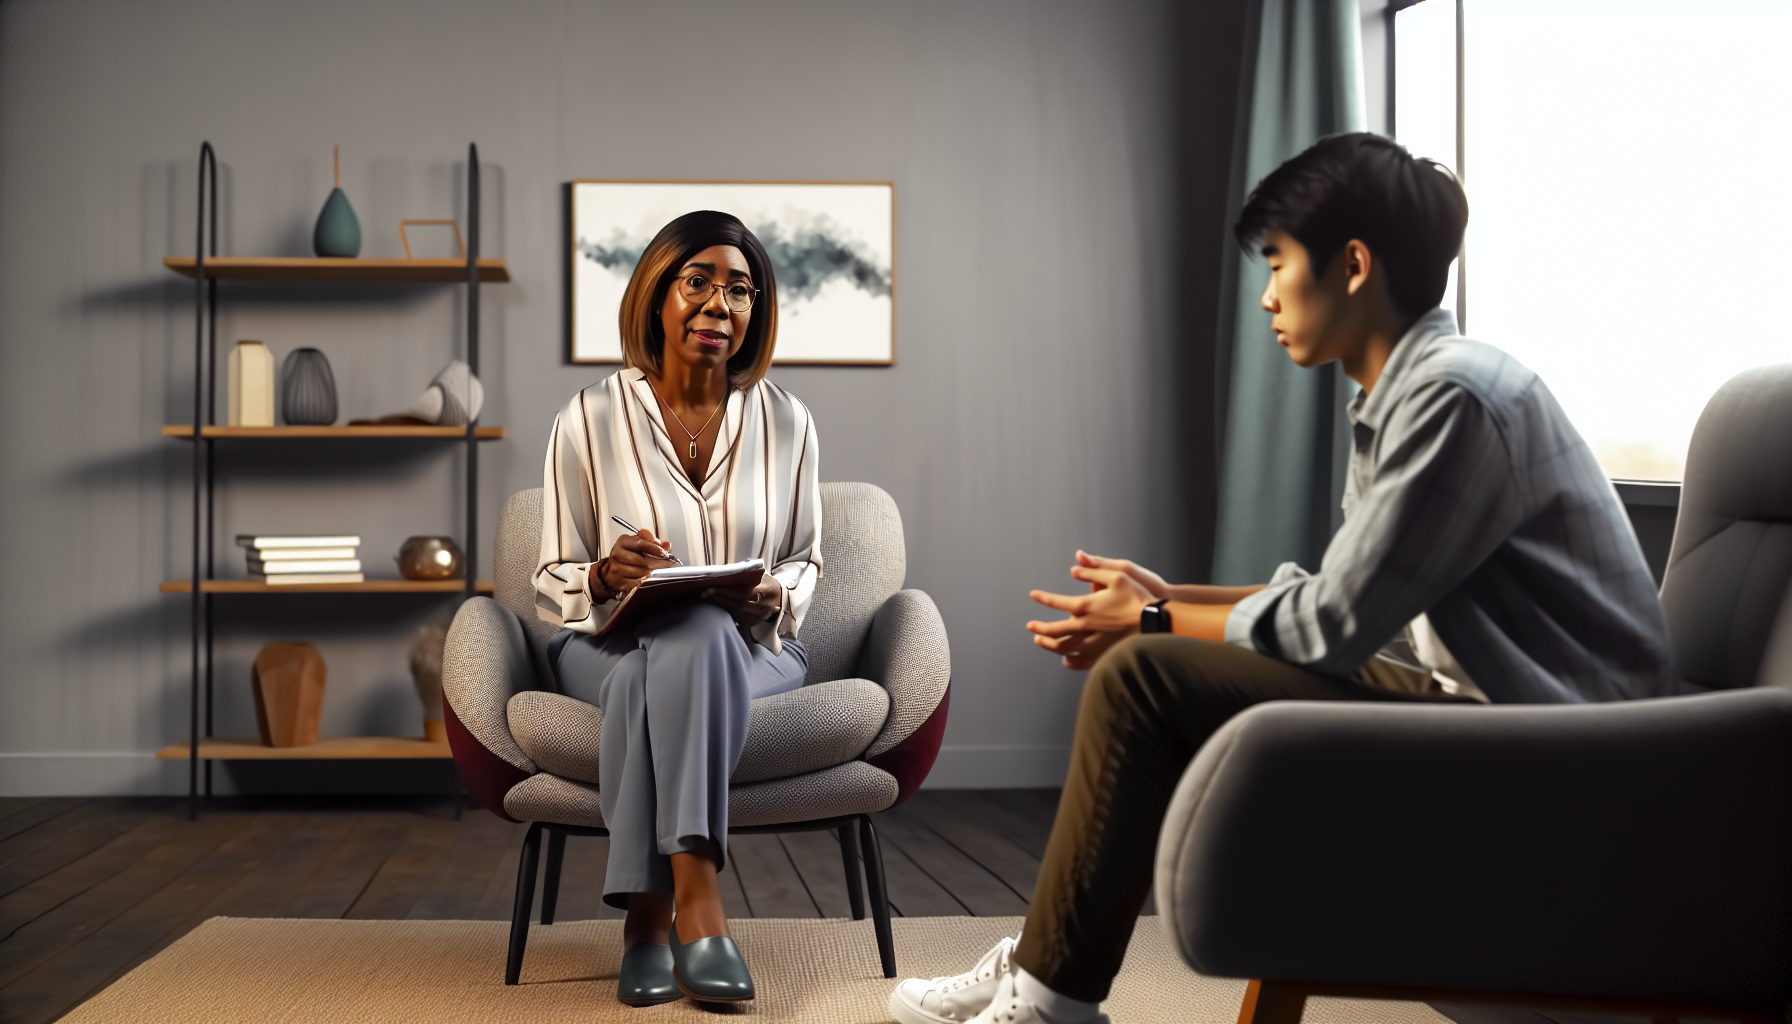 A person having a counseling session with a therapist, representing seeking professional help